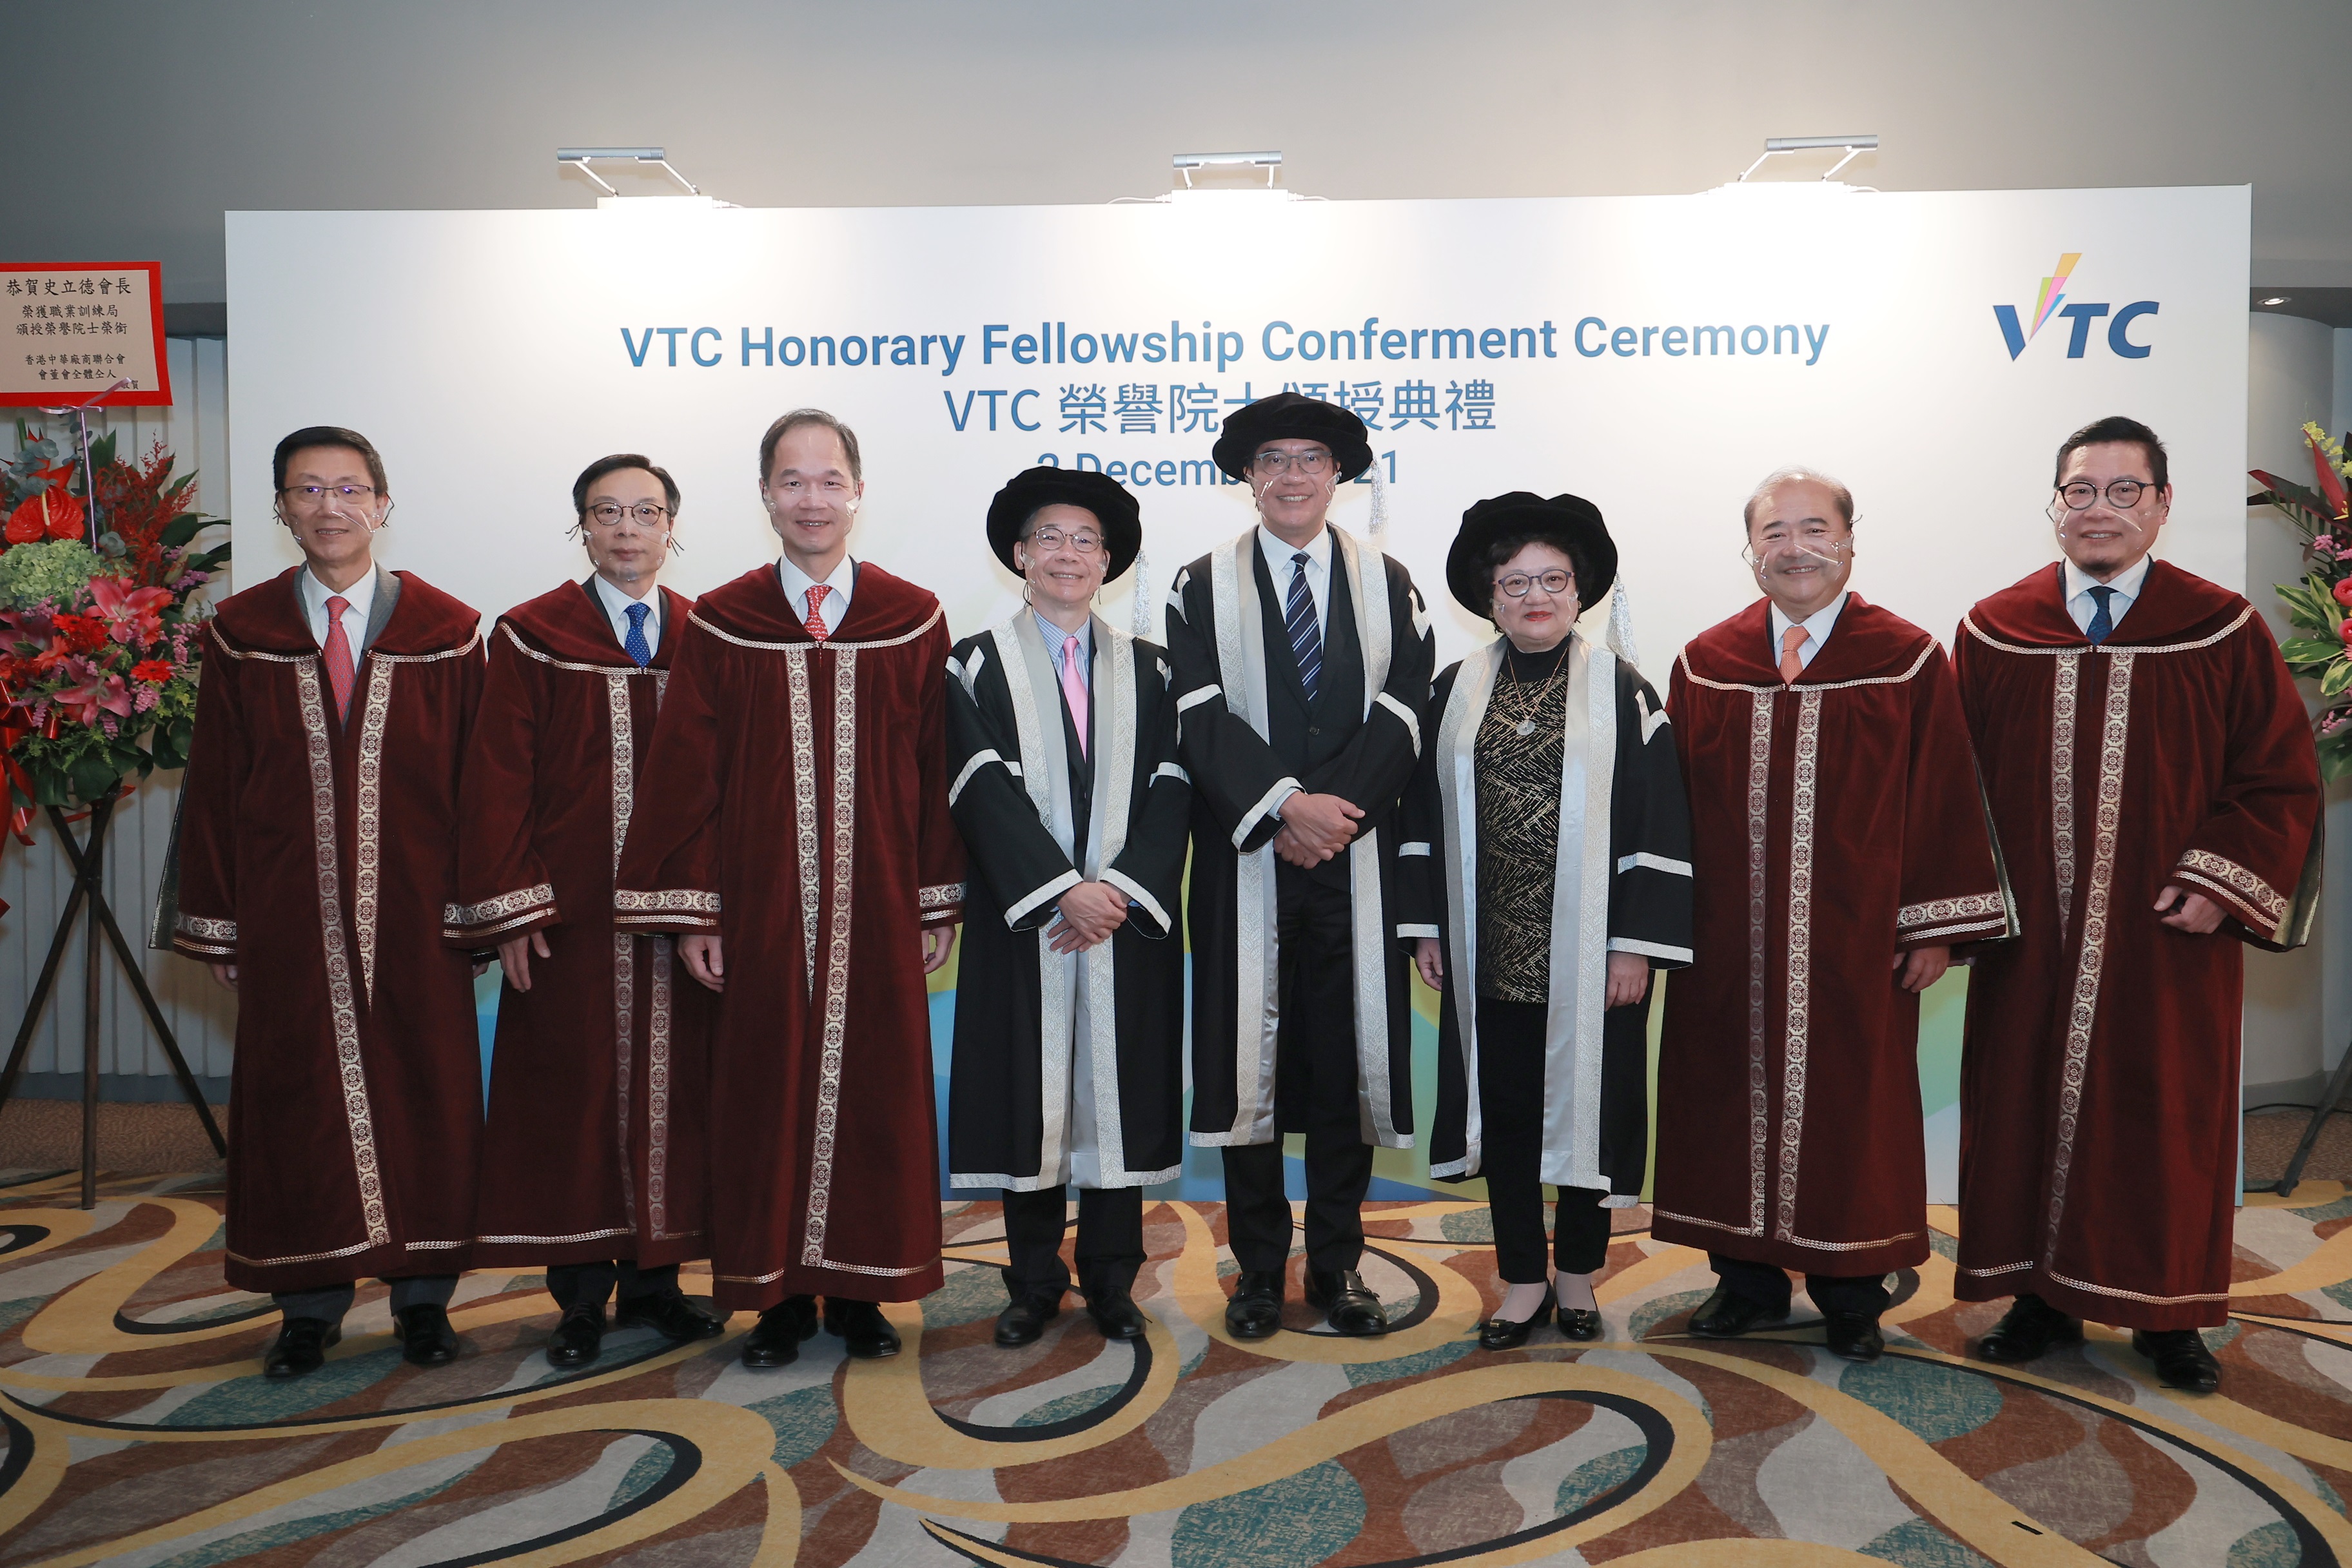 From left: Mr Christopher TSE Hung-keung;  Sr Eddie LAM Kin-wing; Ir CHIANG Tung-keung; VTC Chairman, Mr Tony TAI; the Secretary for Development, Mr Michael WONG; VTC Executive Director, Dr Carrie YAU; Mr KUOK Hoi-sang and Dr Allen SHI Lop-tak